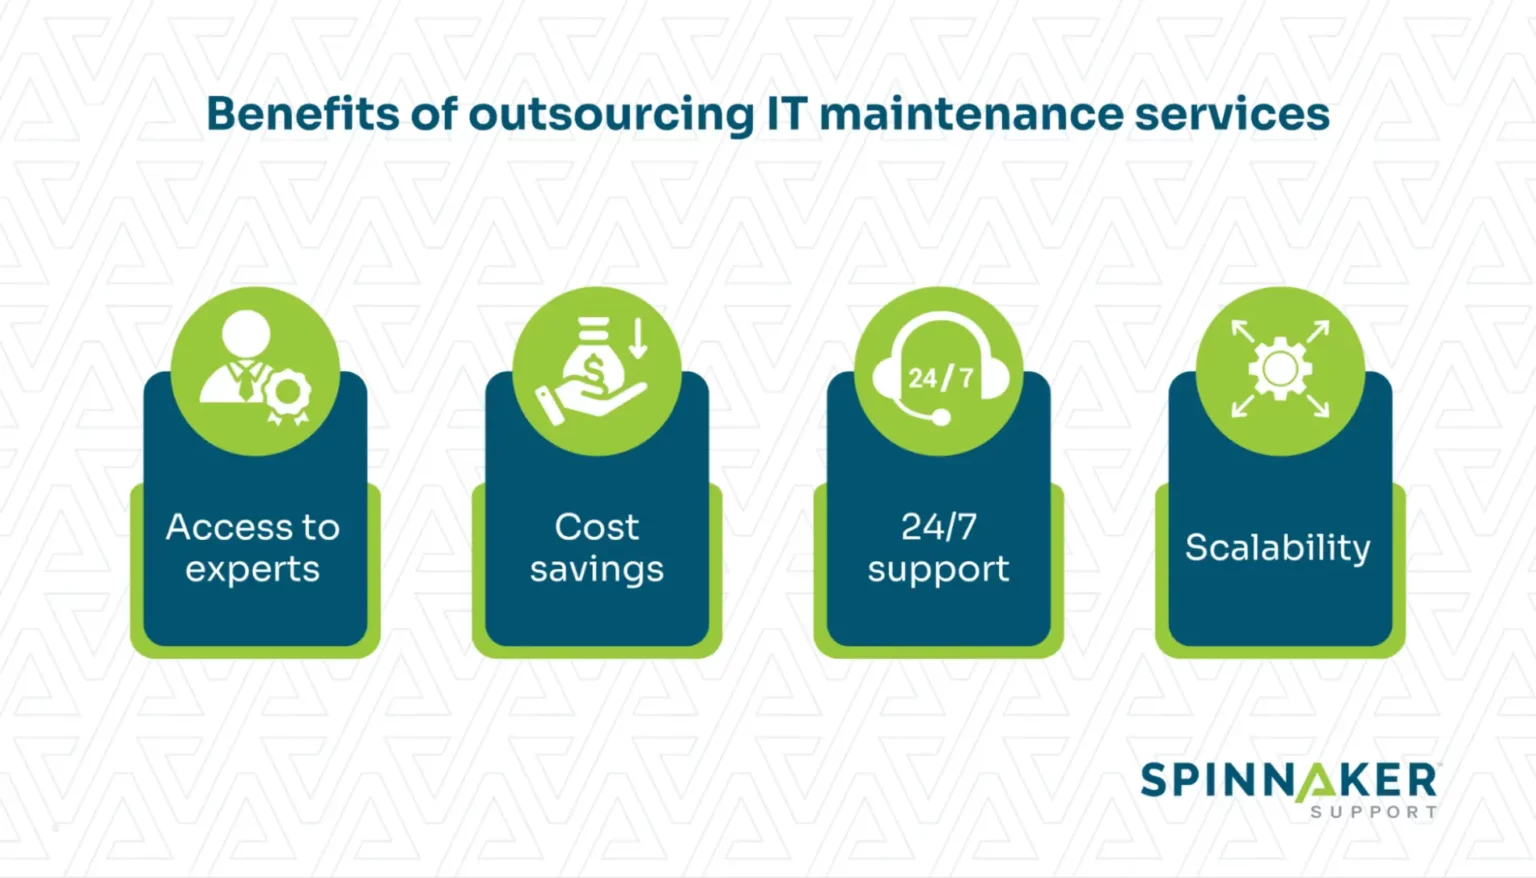 What are the advantages of a third-party IT maintenance service